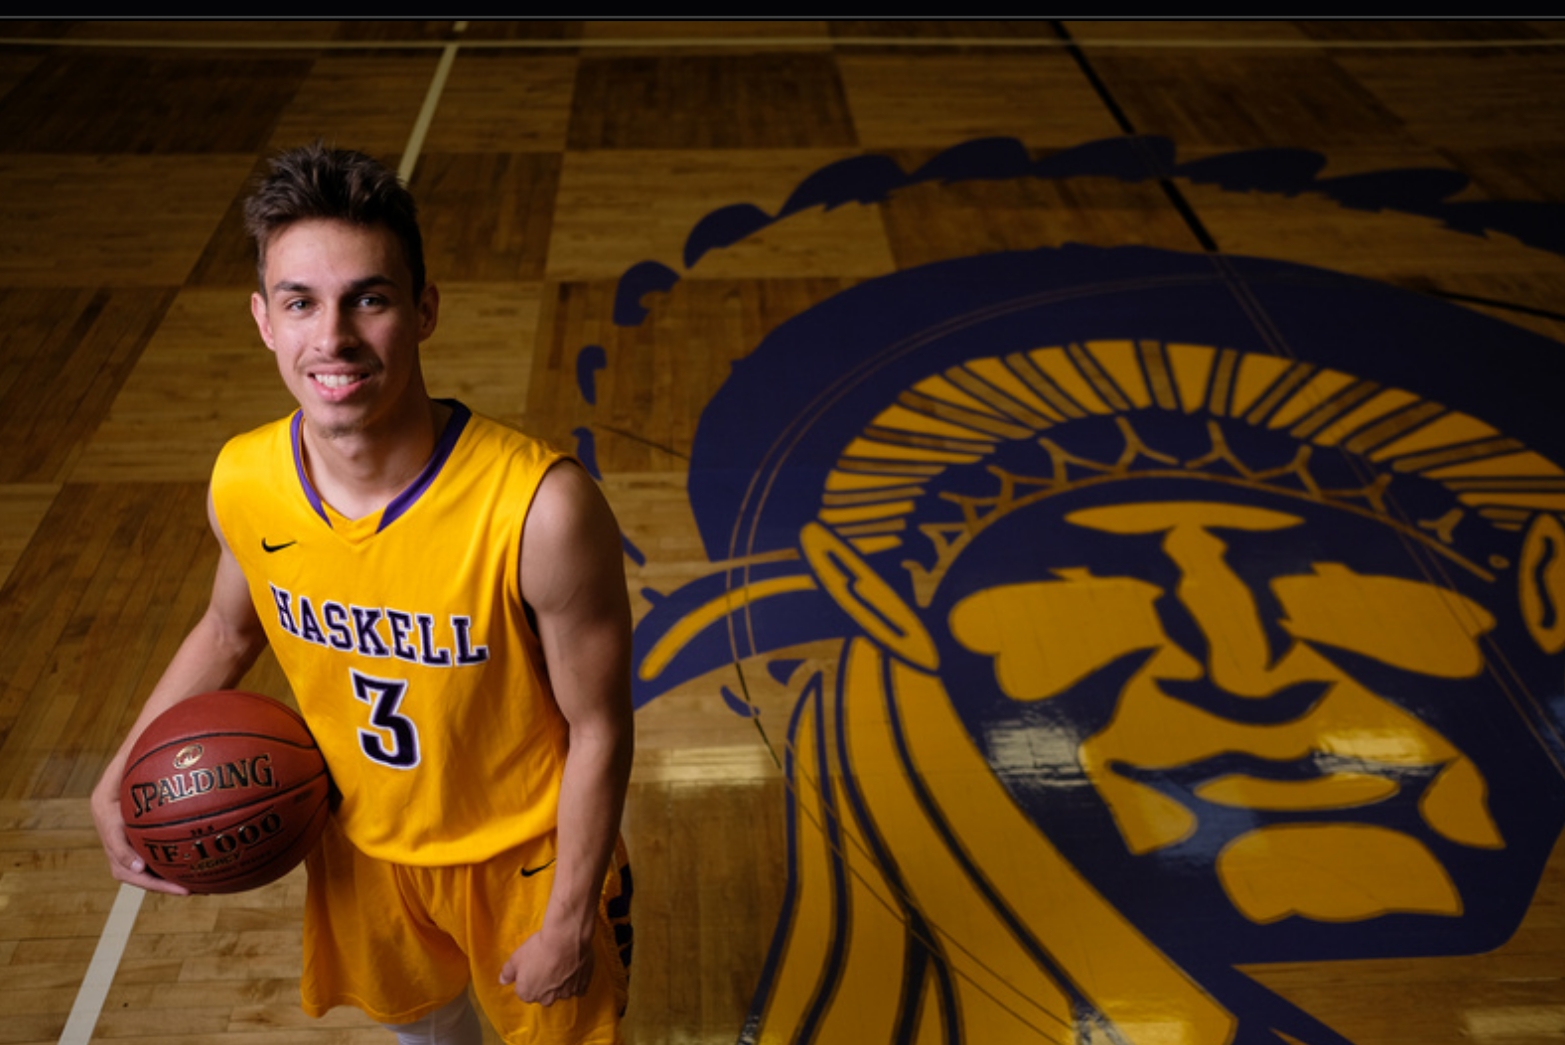 Tristan Keah-Tigh (Kiowa) Leads Haskell Indian Nations University to Pair of Key Wins at College of Ozarks Classic